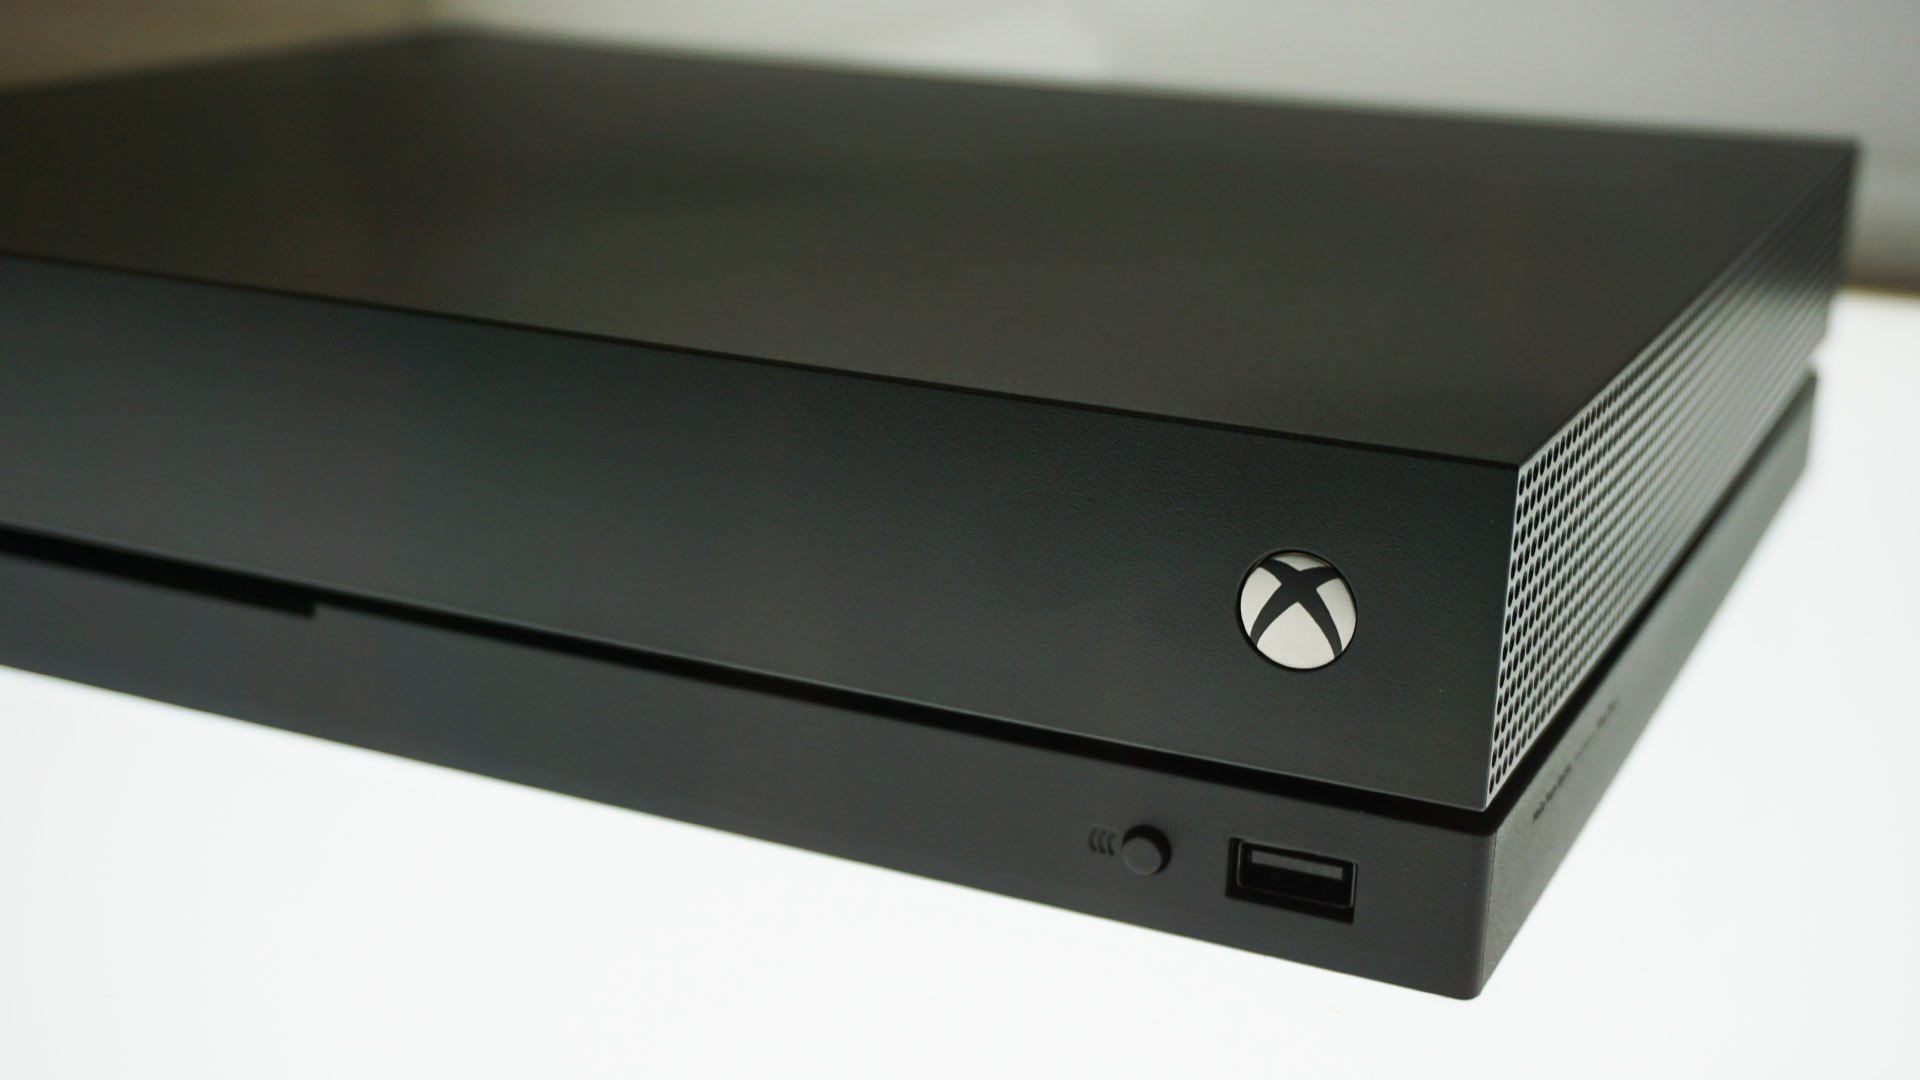 Melbourne Especialista Espere Why Xbox One X owners should care about HDMI 2.1 | Windows Central